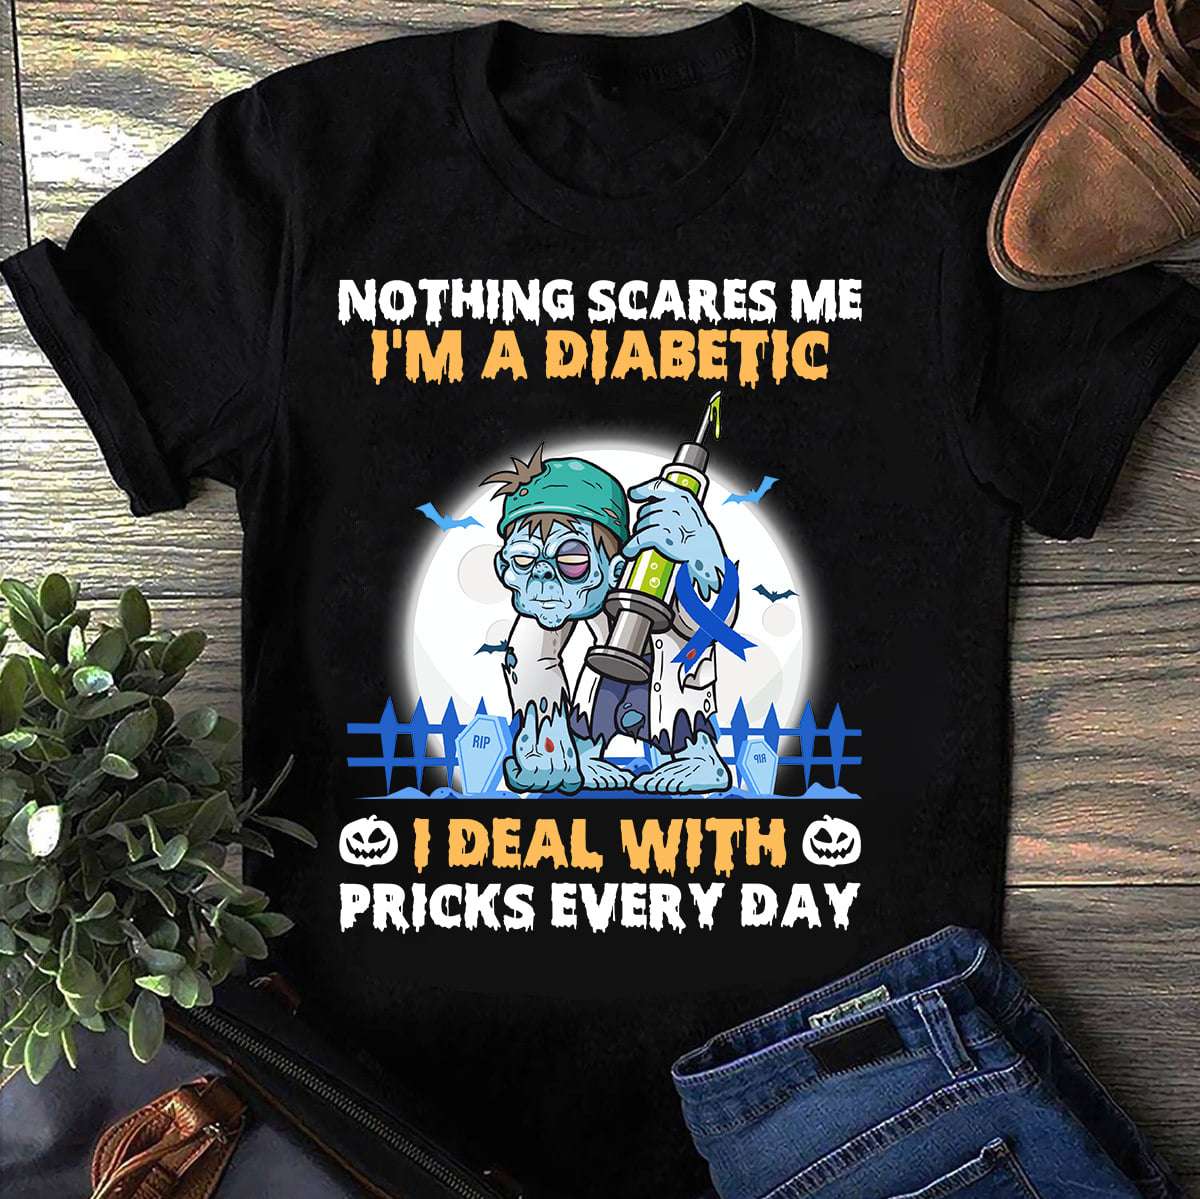 Nothing scares me I'm a diabetic I deal with pricks everyday - Frankenstein halloween costume, halloween costume shirt